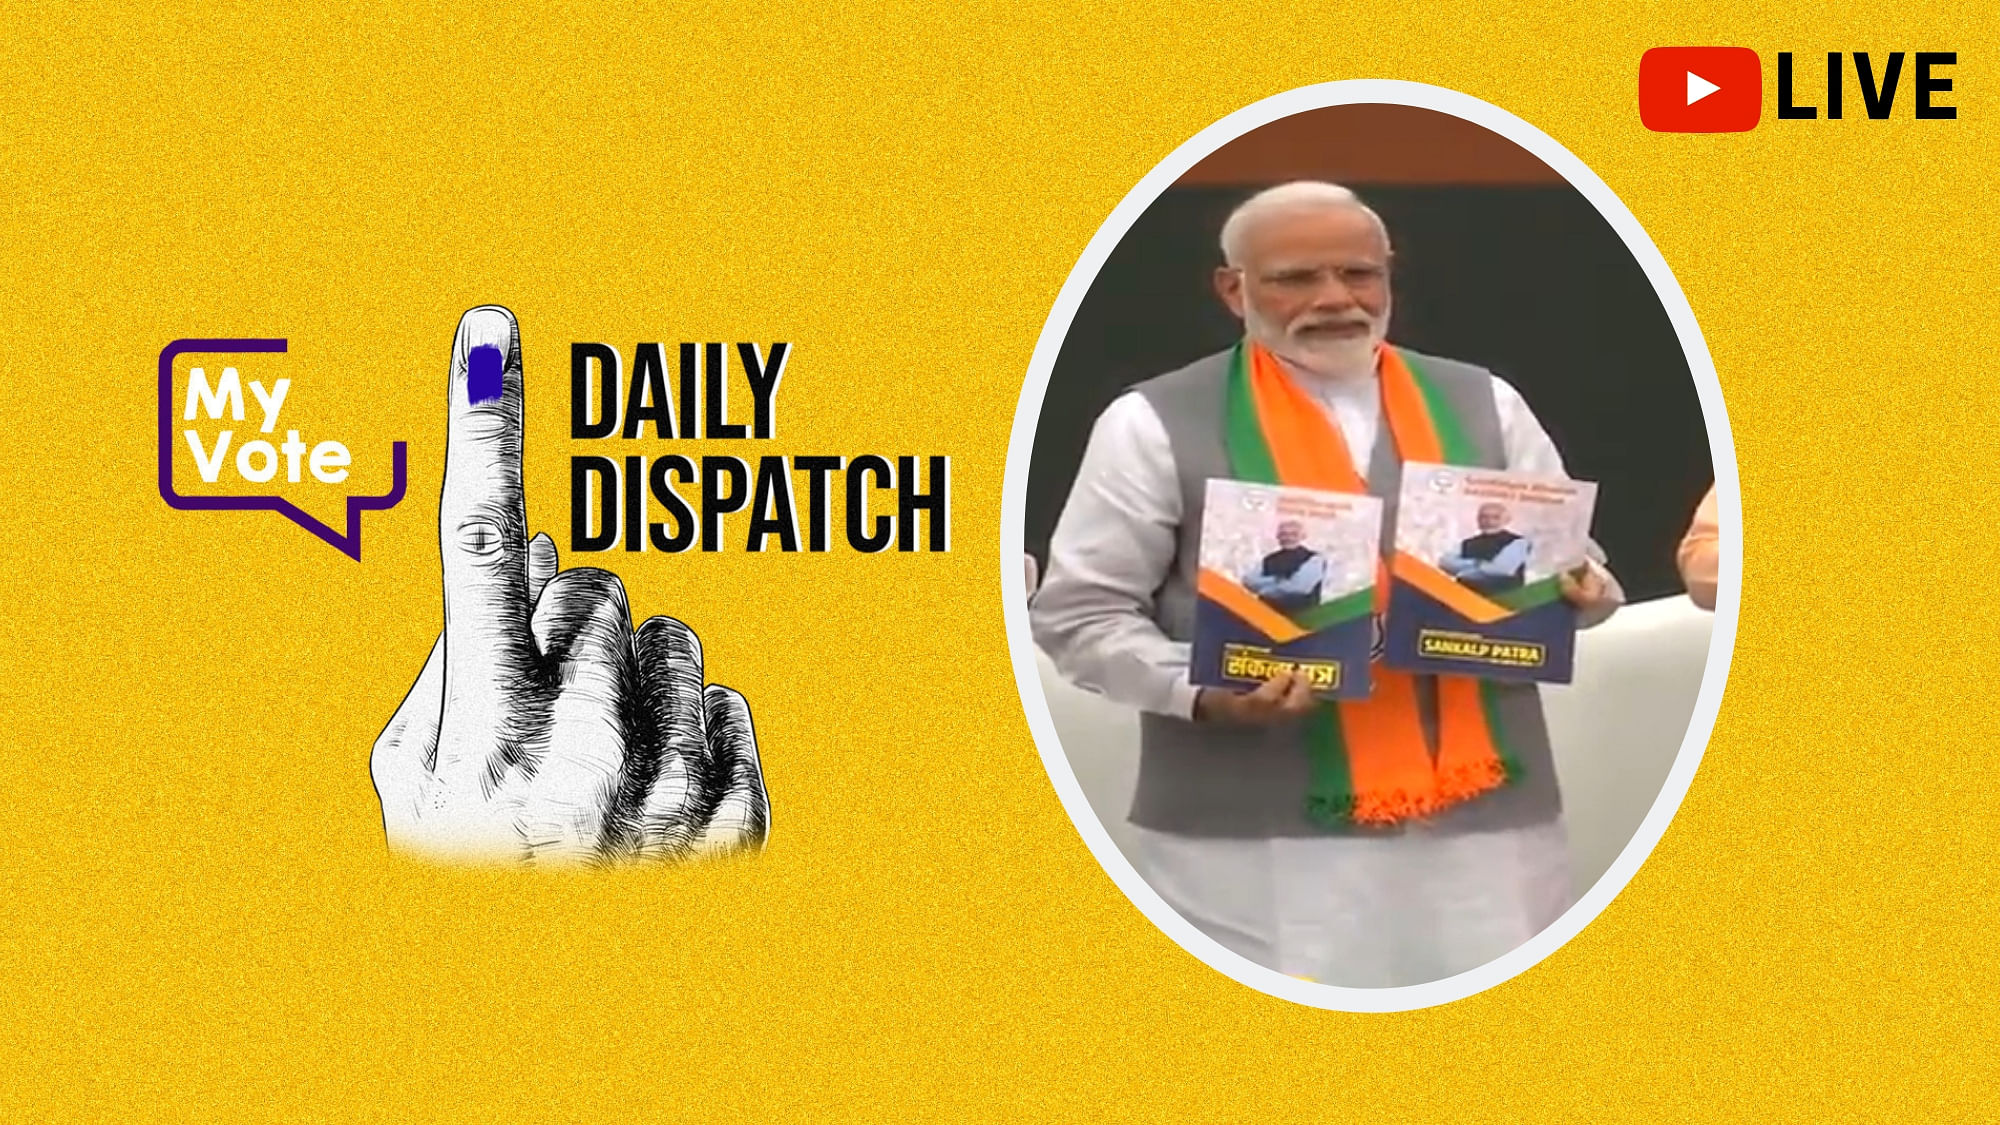 Catch today’s big election updates on this episode of “Daily Dispatch.”